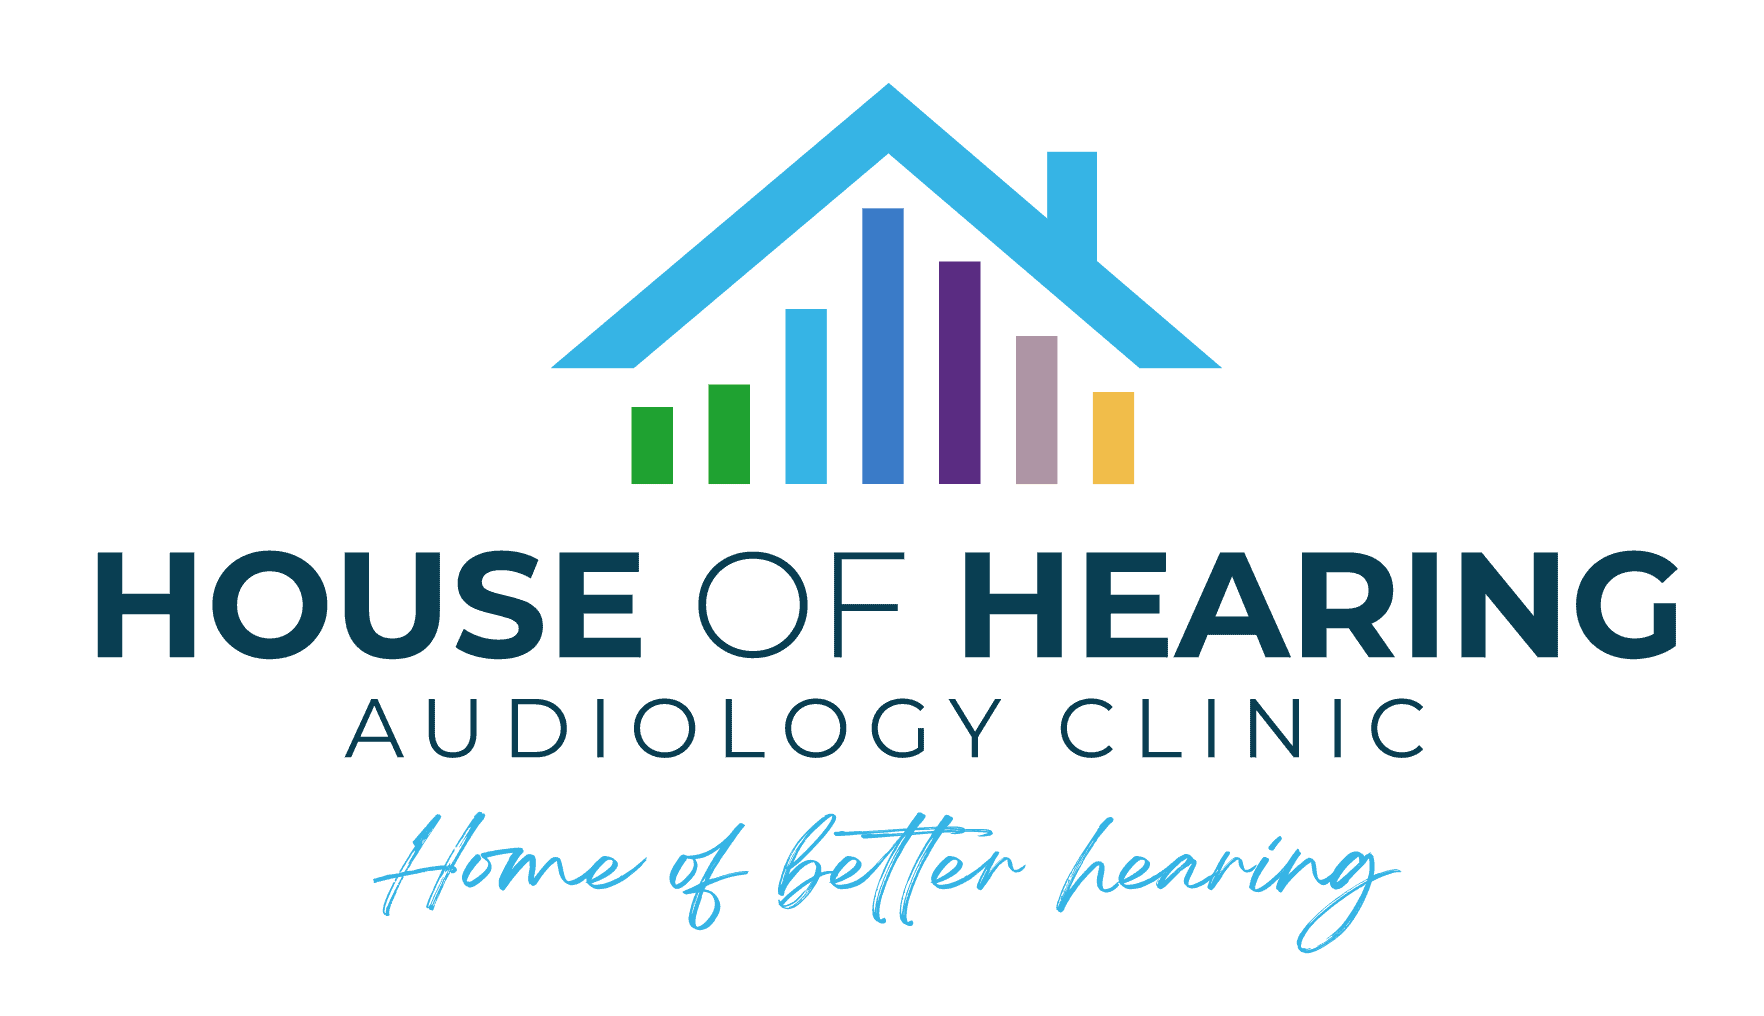 House of Hearing Audiology Clinic